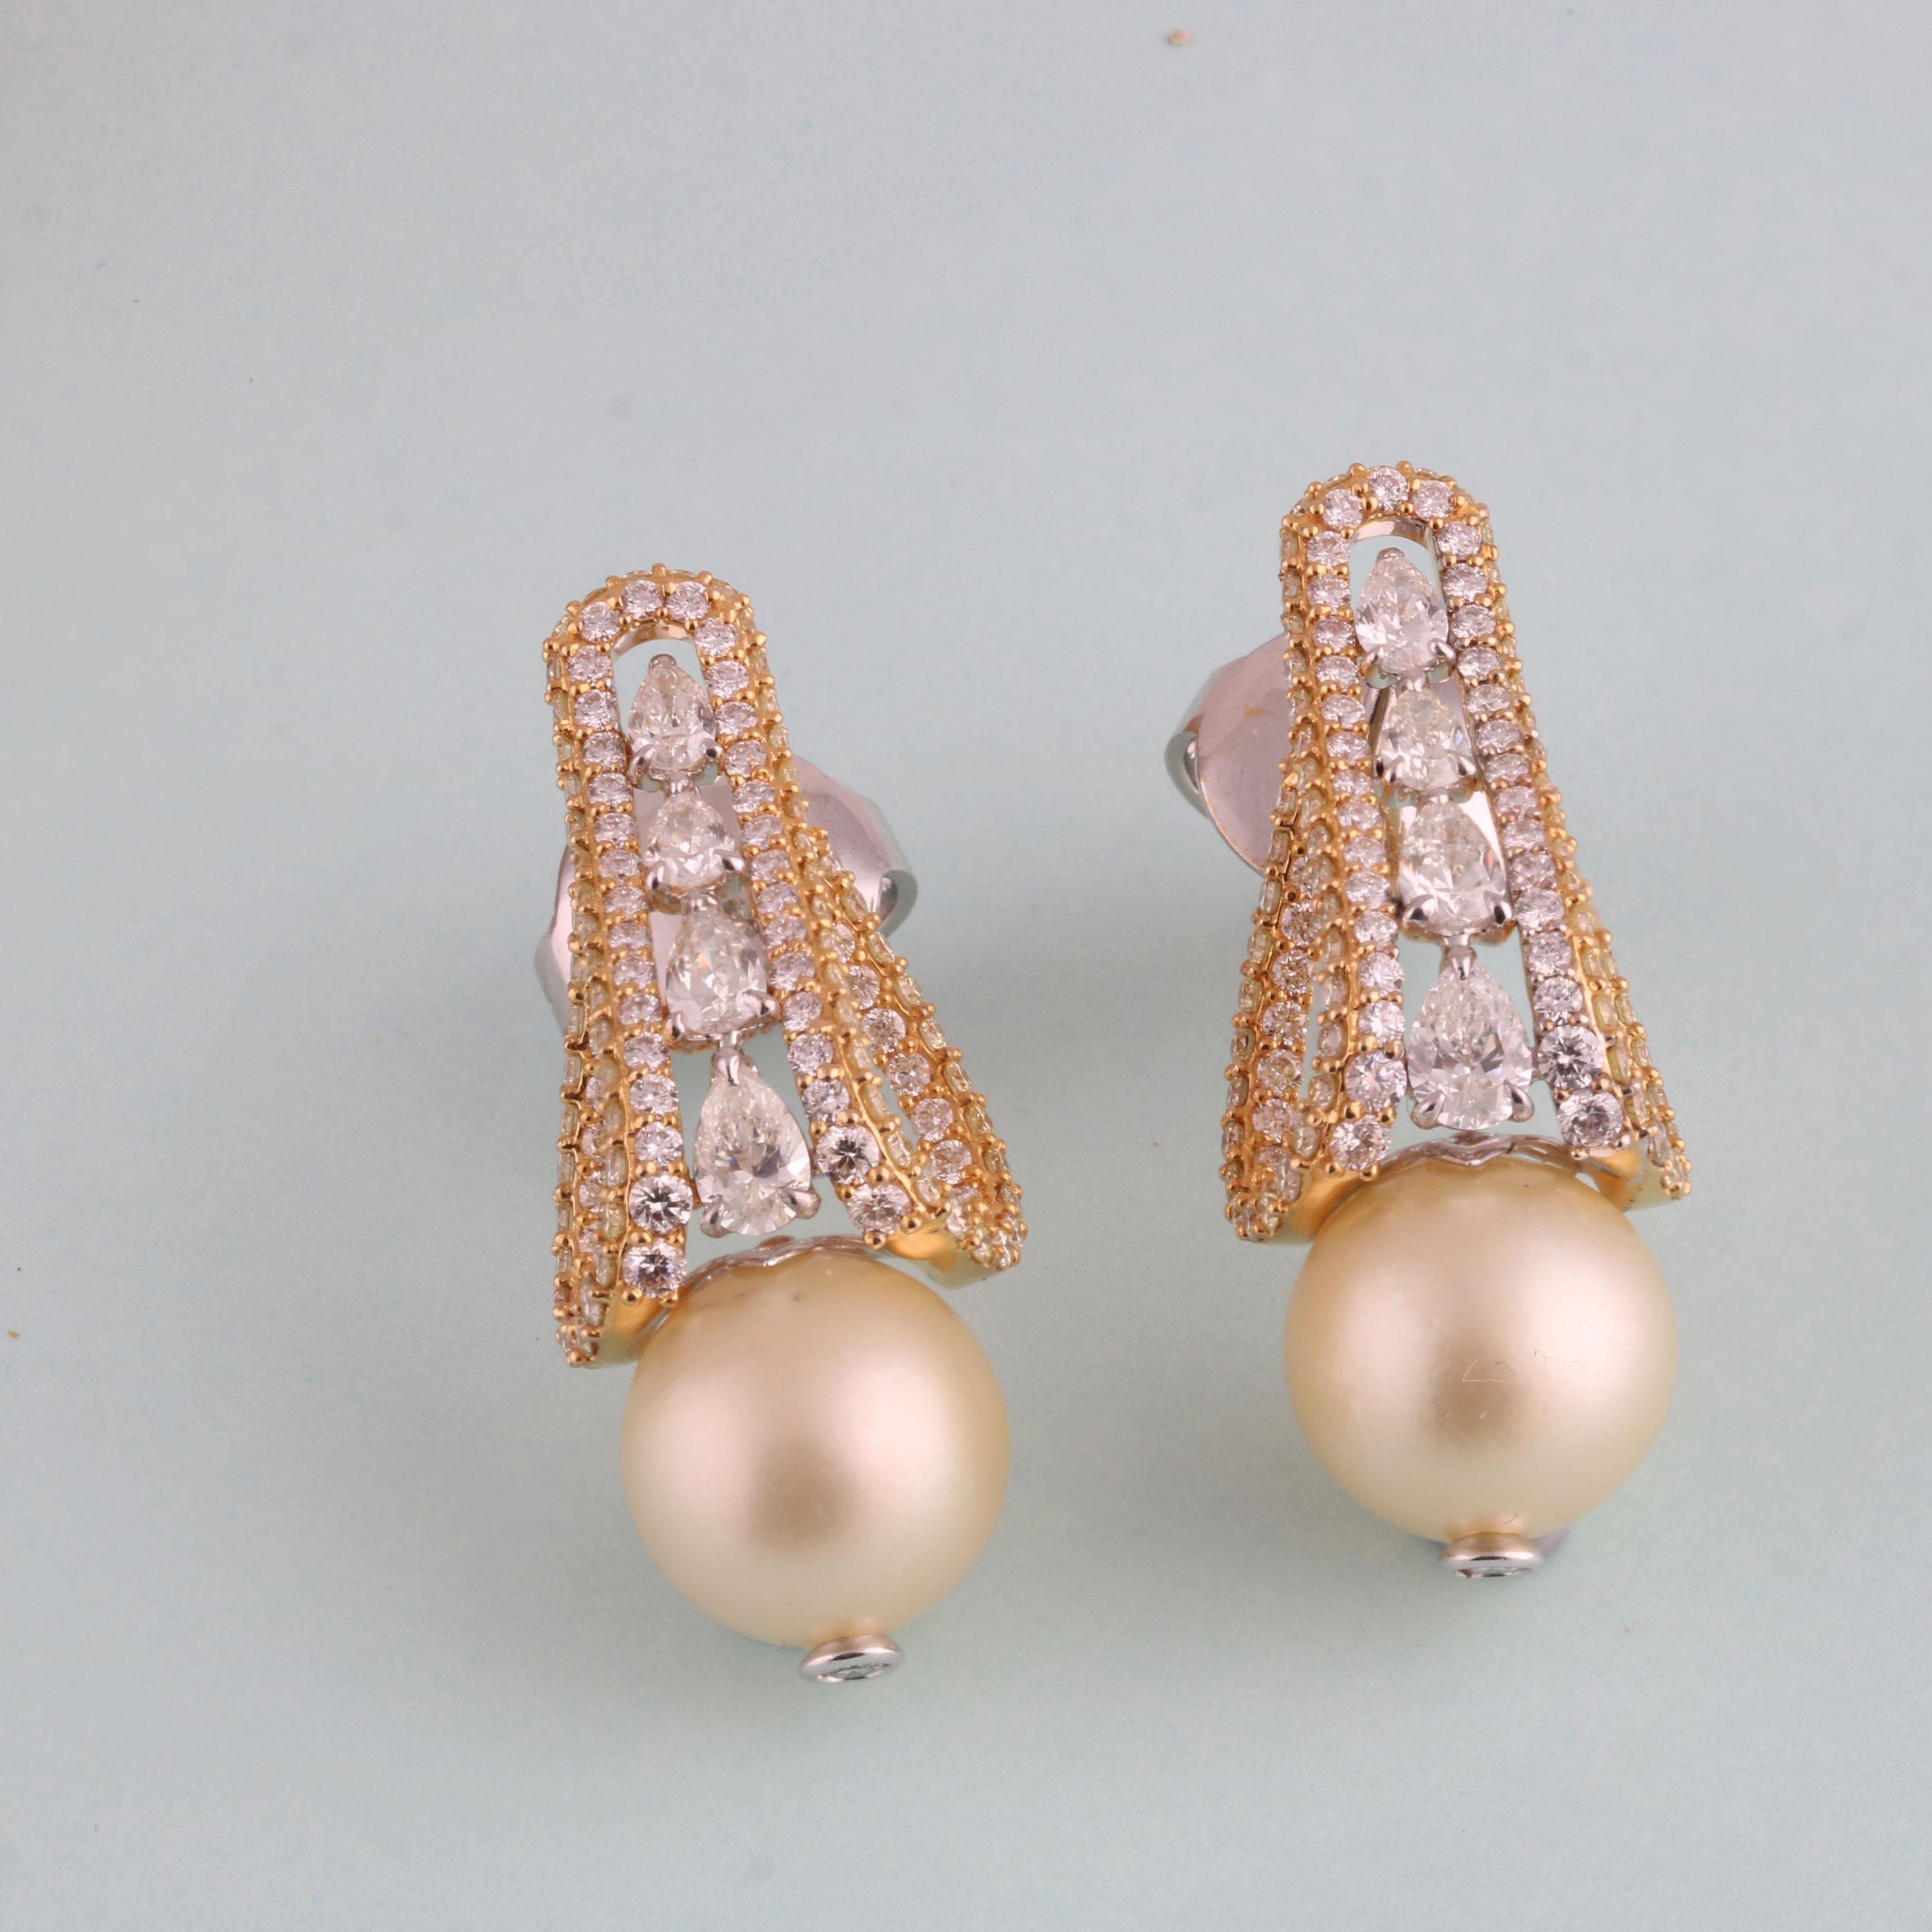 Studio Rêves Ribbon Fold Diamond and South Sea Pearls Stud Earrings in 18K Gold For Sale 3